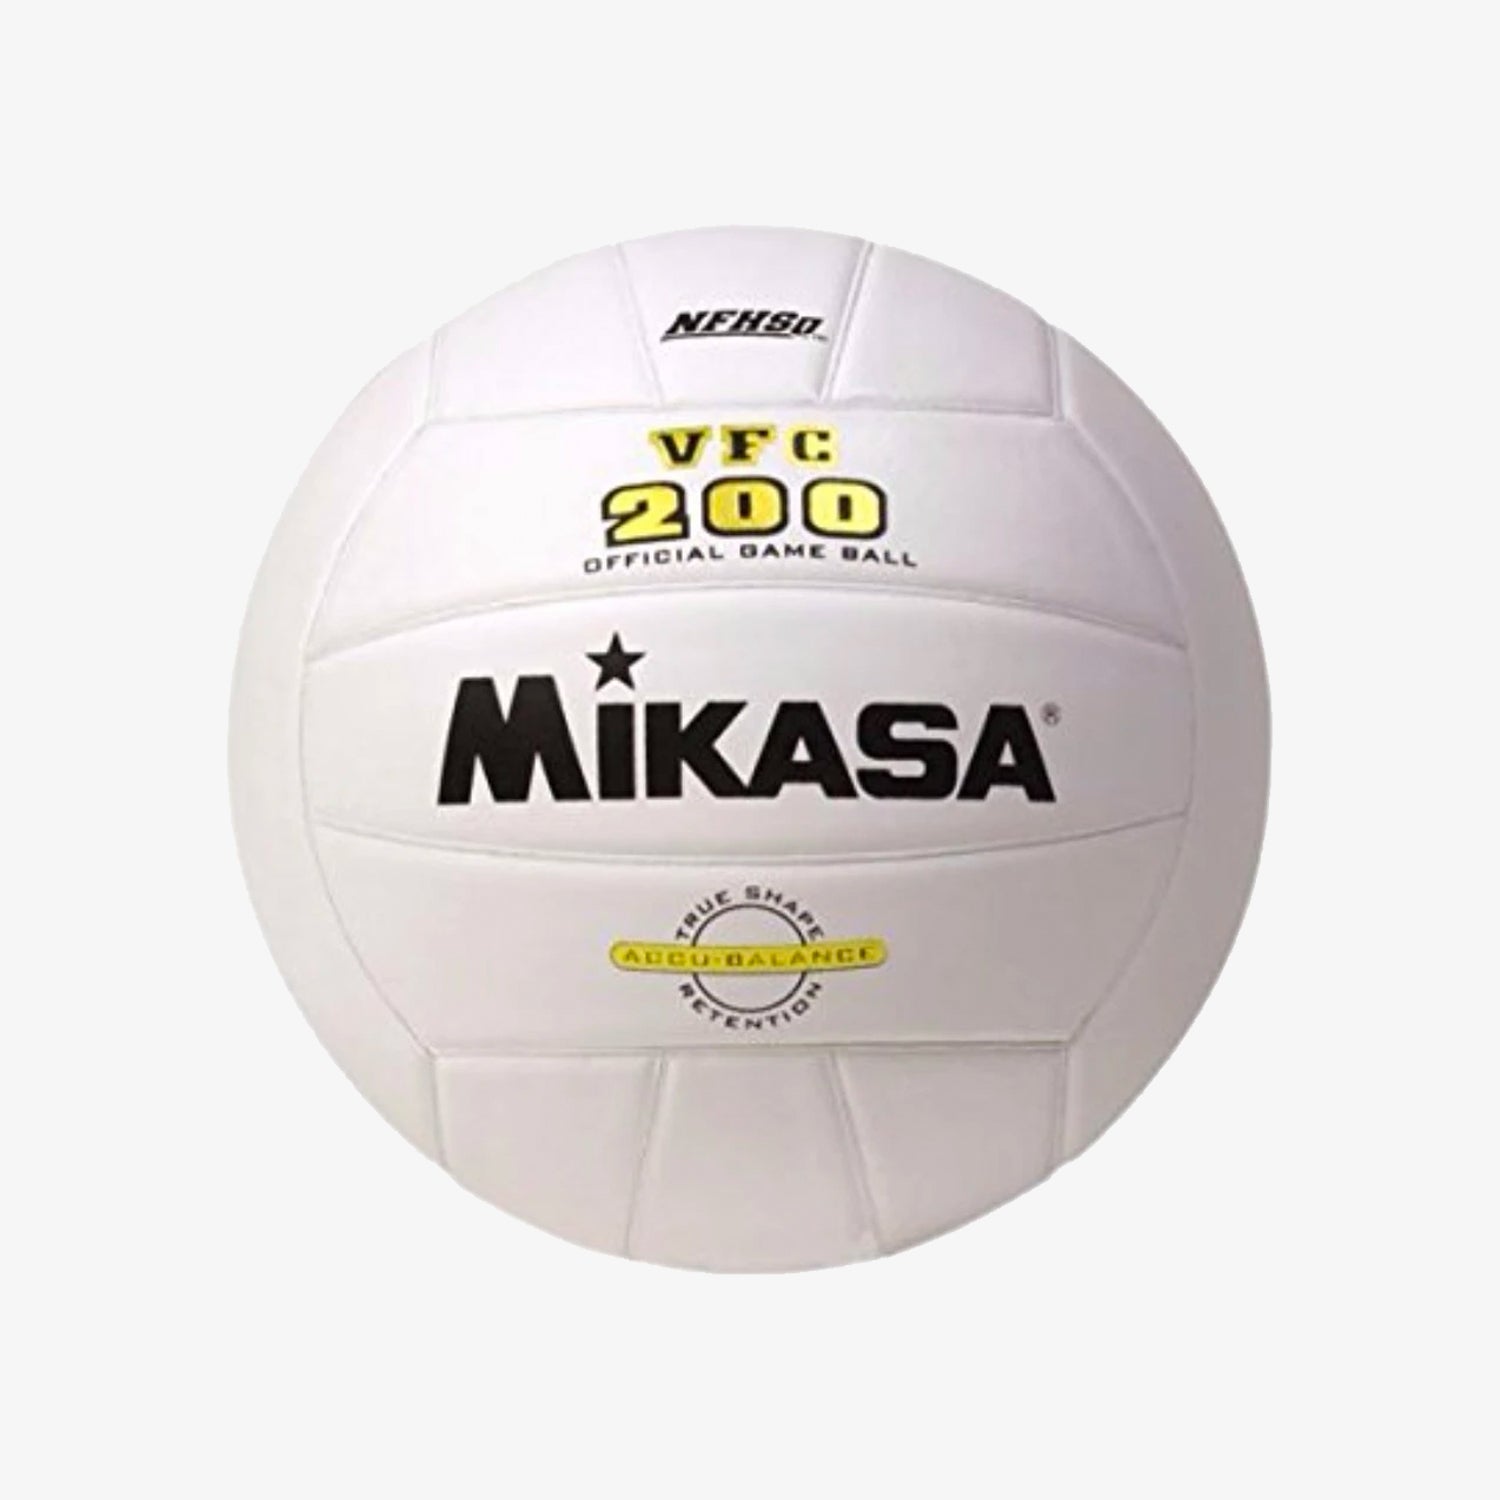 Vfc 200 Official Volleyball